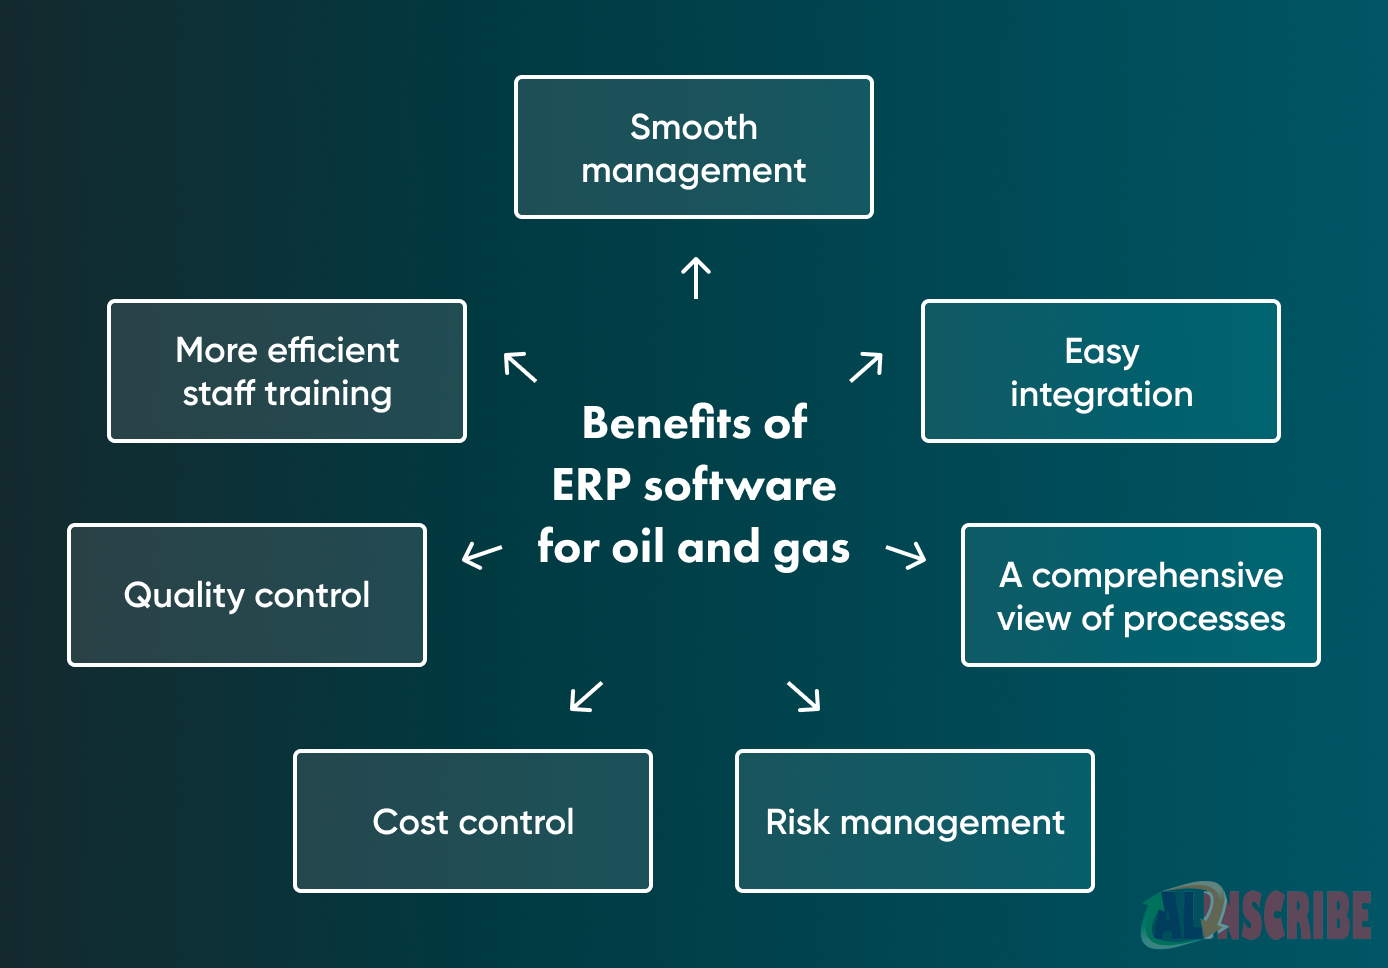 Benefits of oil and gas ERP software